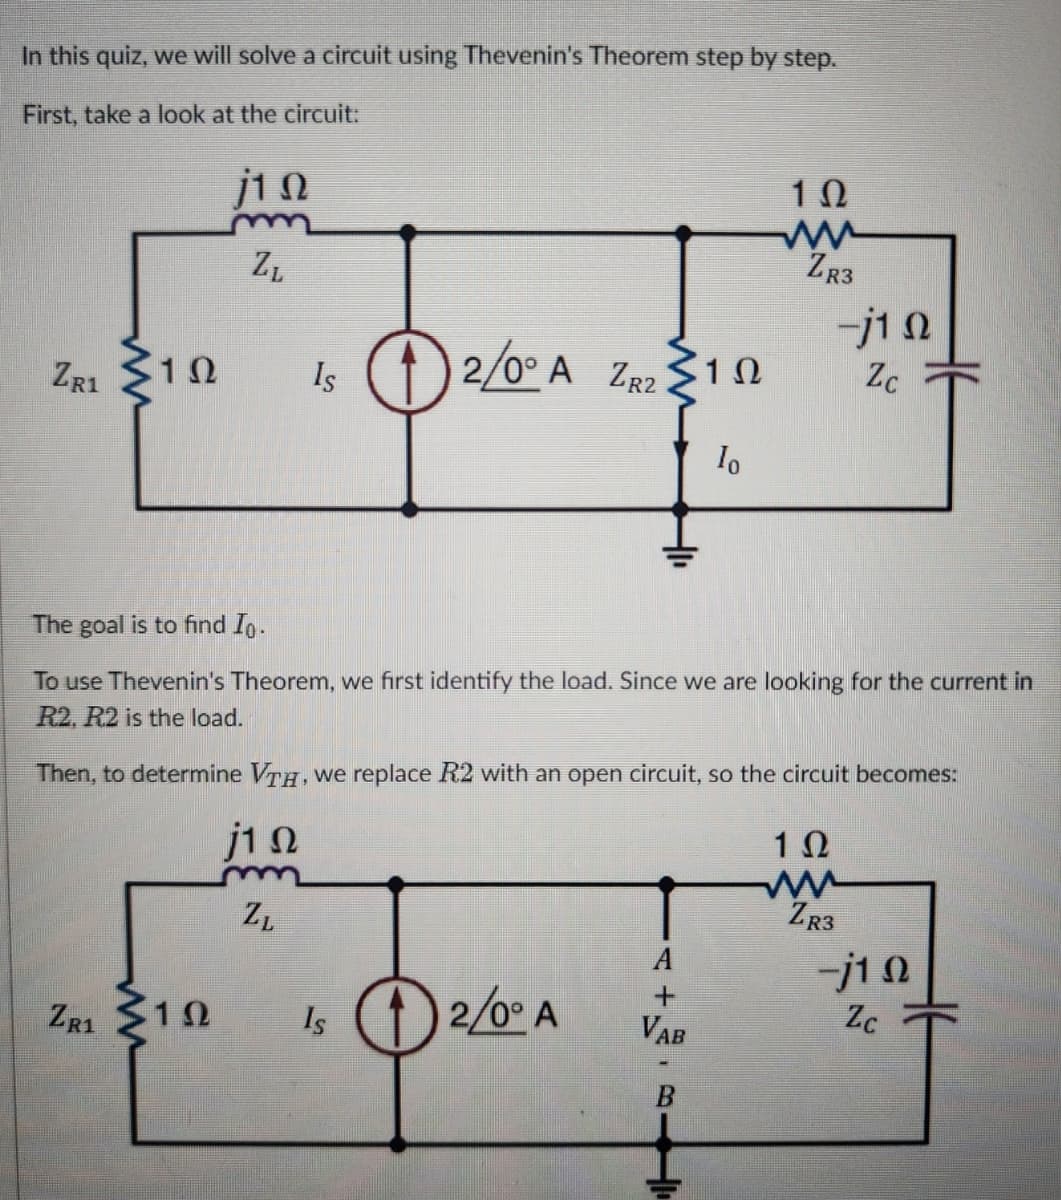 In this quiz, we will solve a circuit using Thevenin's Theorem step by step.
First, take a look at the circuit:
j10
ZL
10
ww
ZR3
ZR1
1 Ω
Is 12/0° A ZR2 10
Ω
-j10
Zc
10
The goal is to find Io.
To use Thevenin's Theorem, we first identify the load. Since we are looking for the current in
R2, R2 is the load.
Then, to determine VTH, we replace R2 with an open circuit, so the circuit becomes:
j10
ZL
1 Ω
ww
ZR3
-j10
ZR1 10
1Ω
Is 2/0° A
+
VAB
Zc